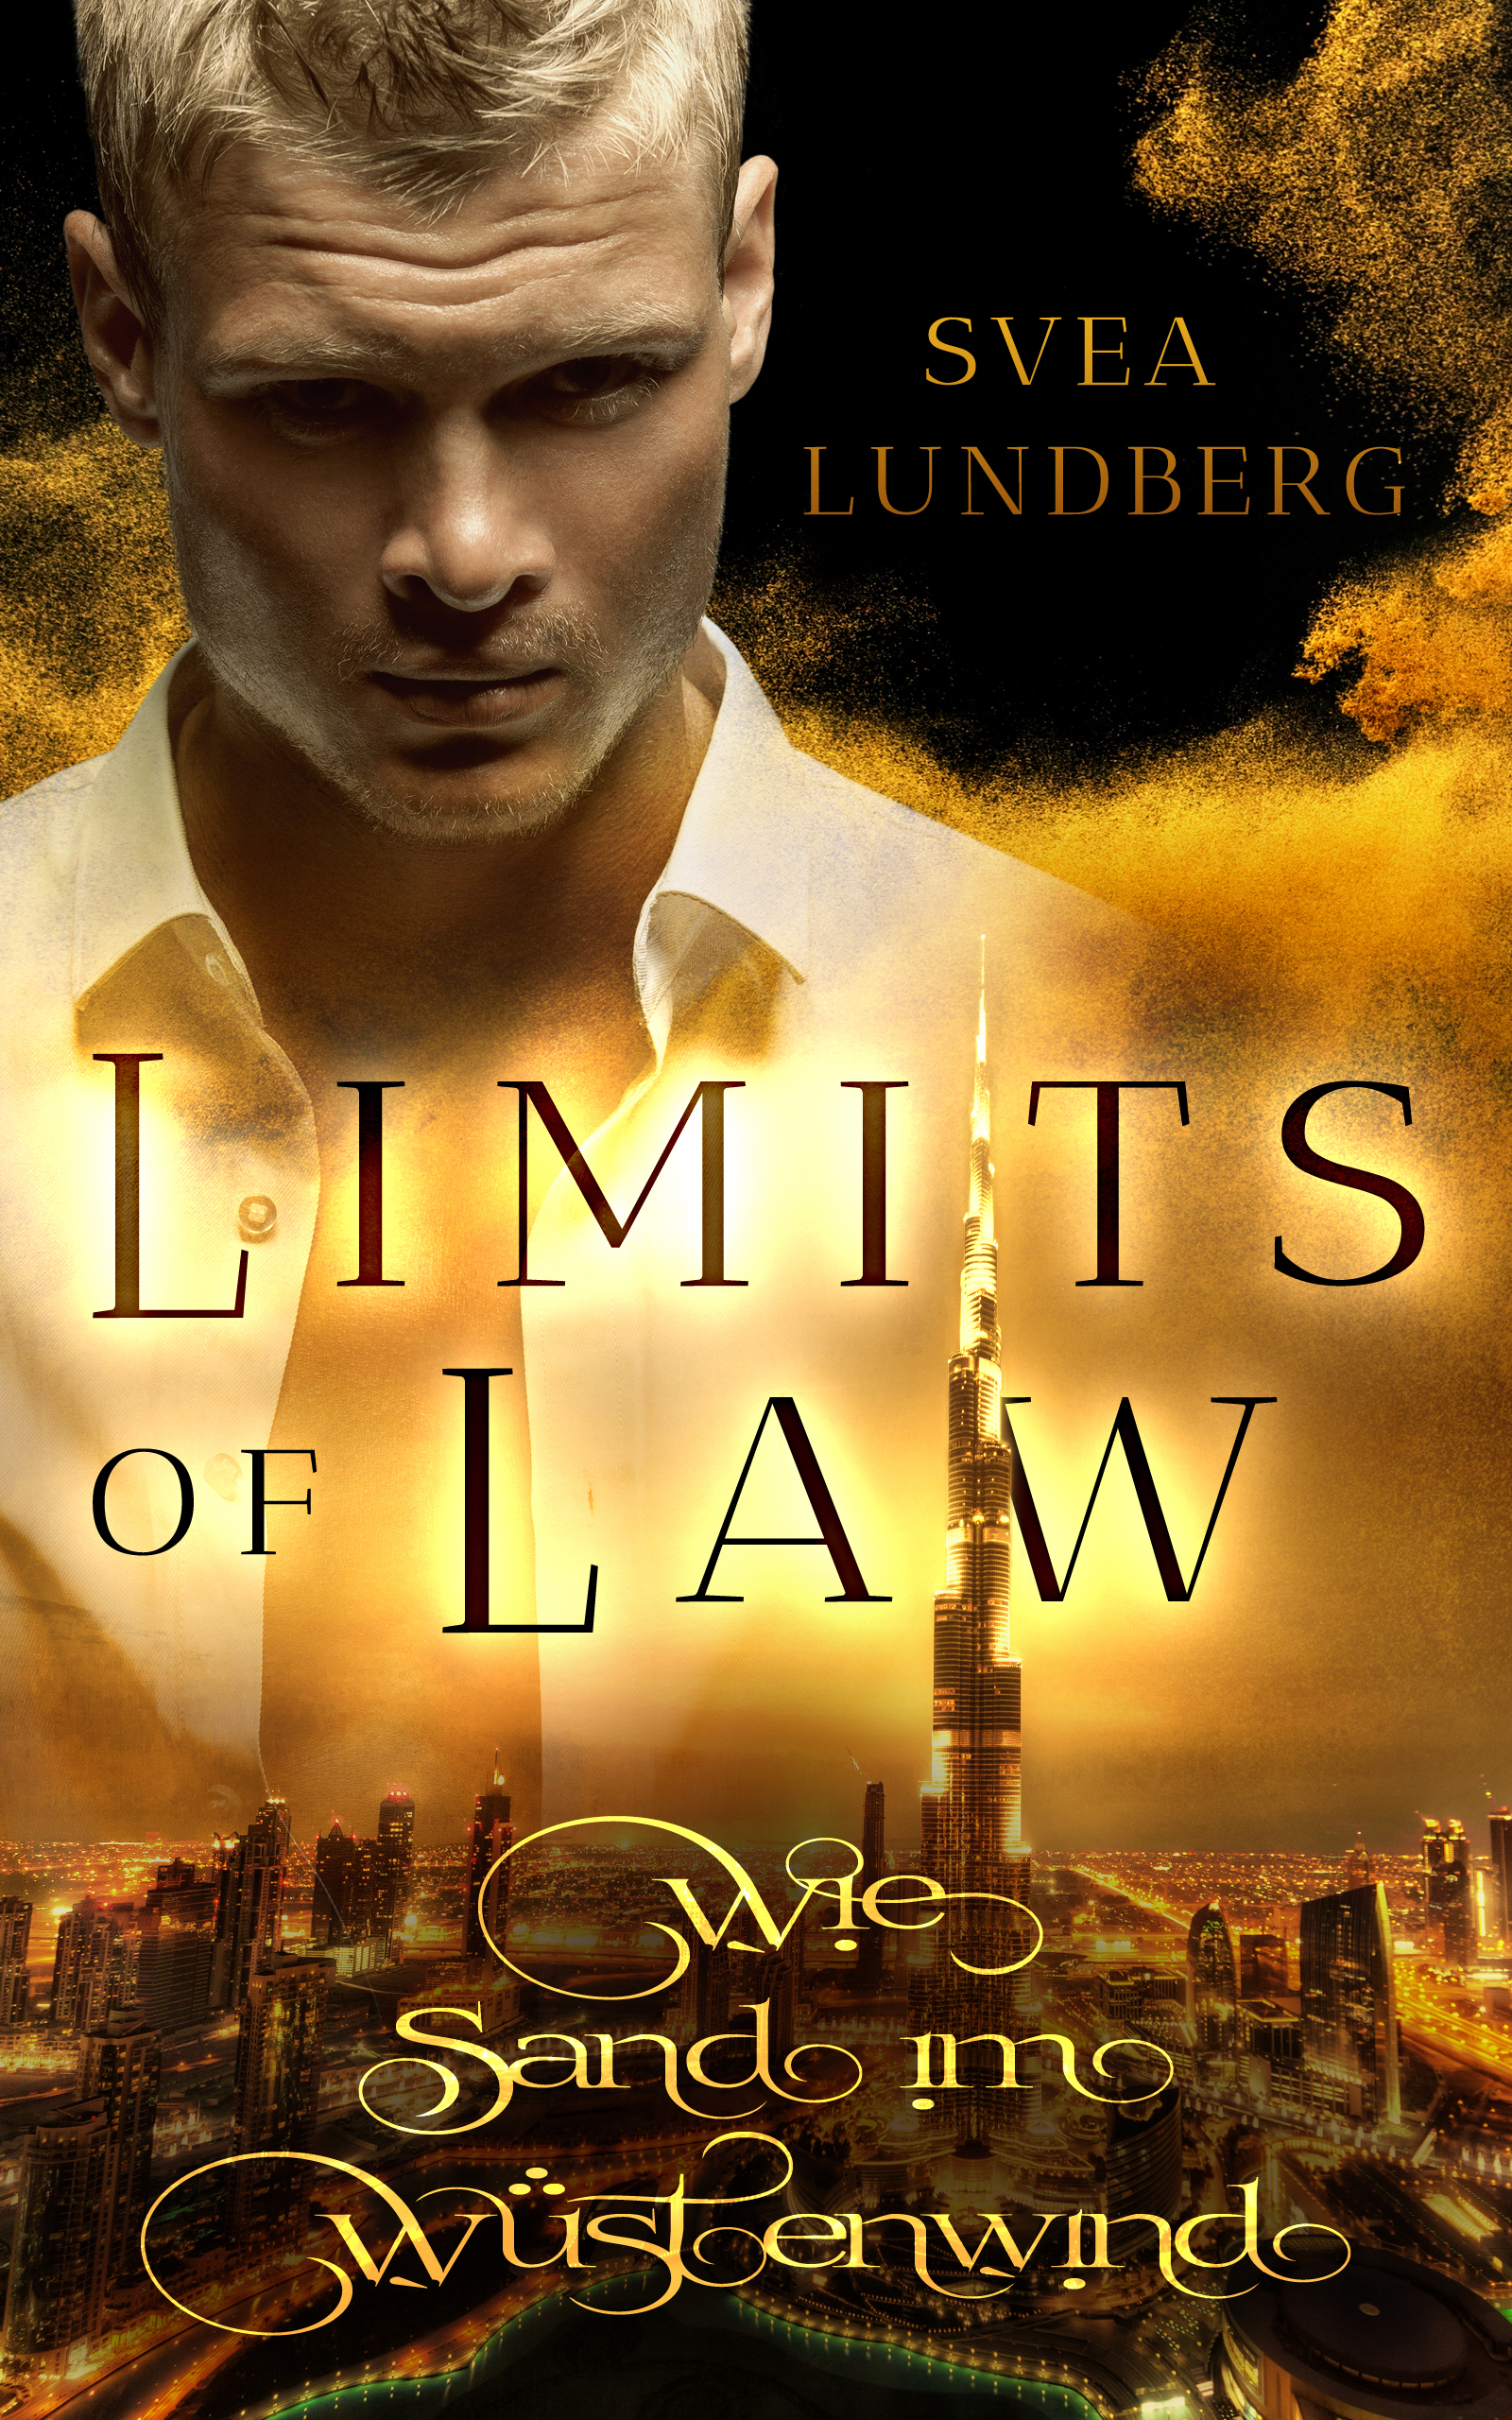 Limits of Law